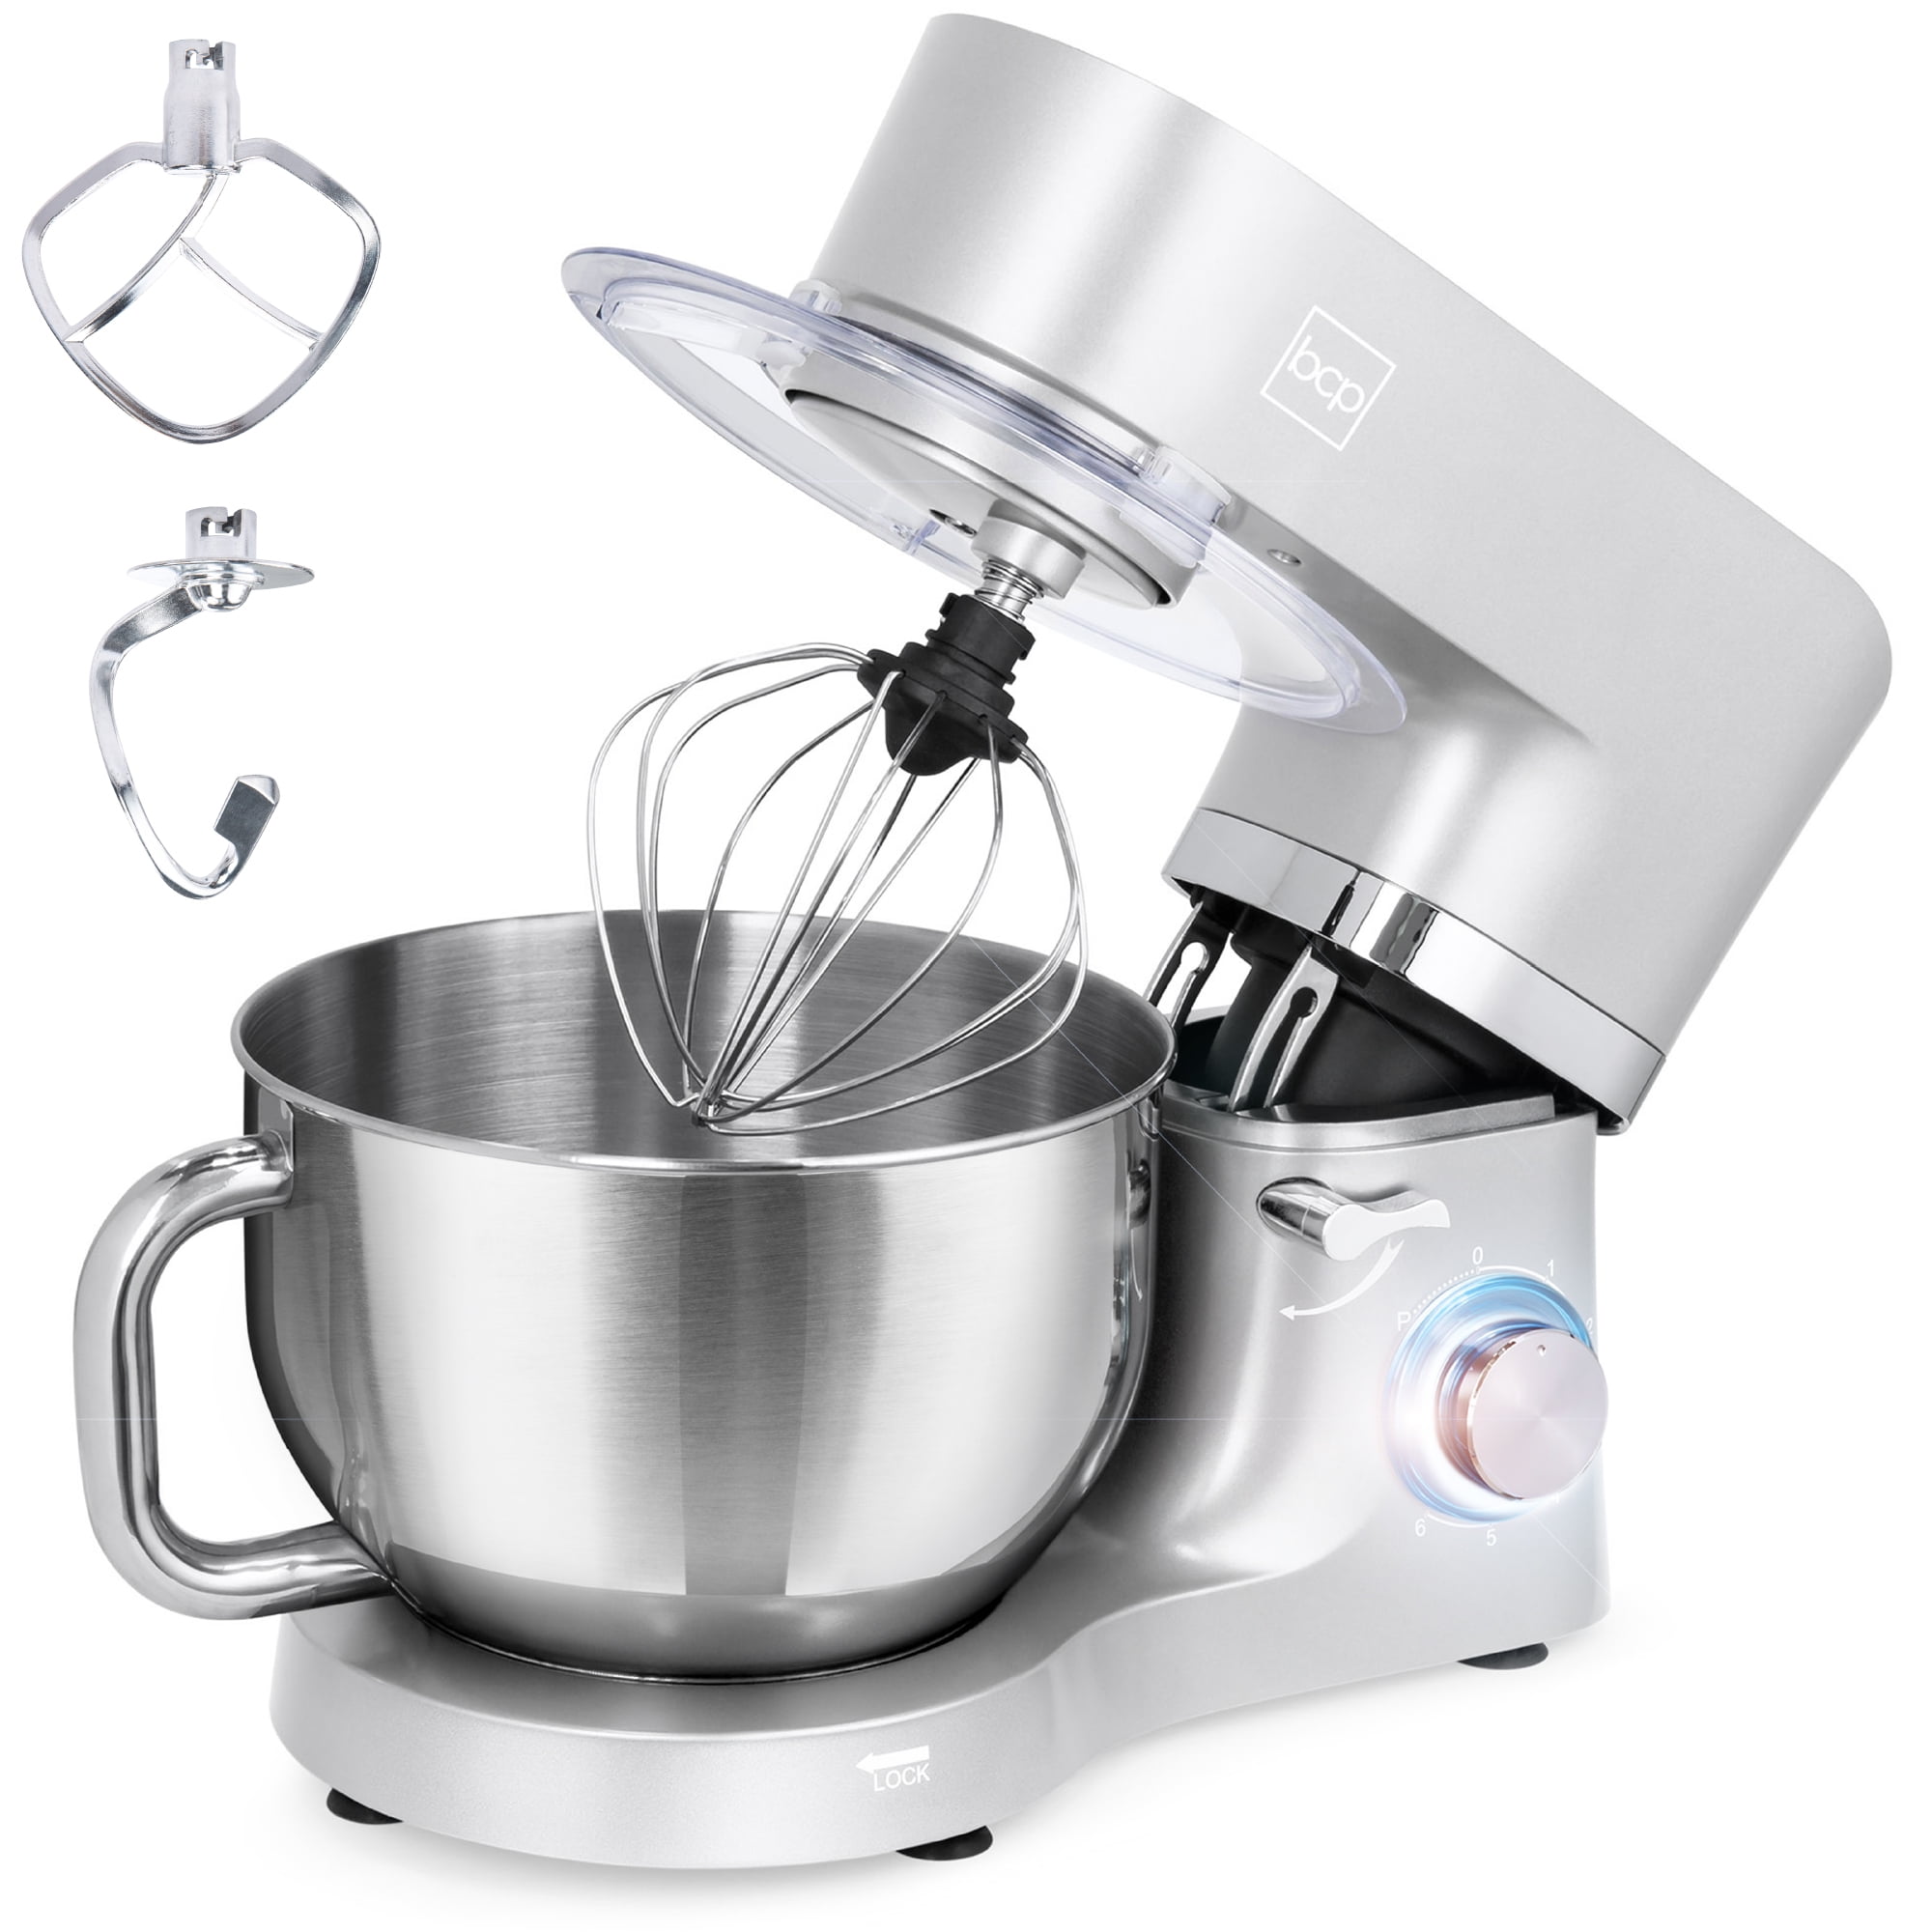 The Best Kitchen Mixer for Perfect Results